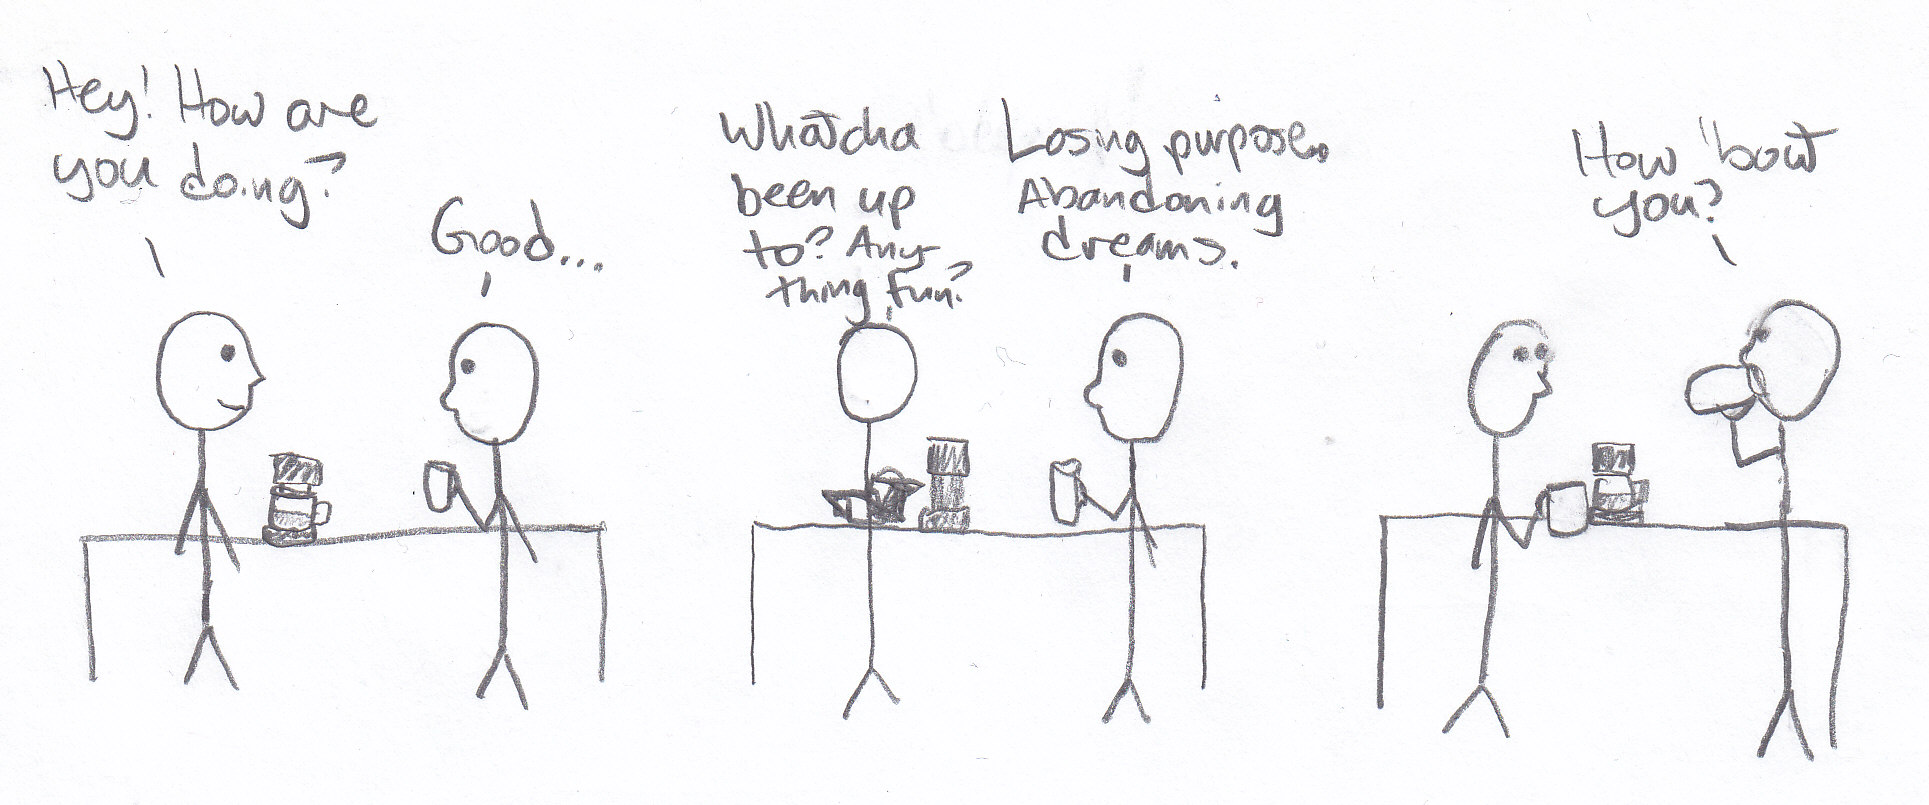 Stick figures at a table with a coffee maker. Frame 1: first person: 'Hey! How are you doing?' second person, holding a mug: 'Good...' Frame 2: first person, pouring a mug of coffee: 'Whatcha been up to? Anything fun?' second person: 'Losing purpose. Abandoning dreams.' Frame 3: first person holding mug stares at second person. second person, drinking from their mug: 'How 'bout you?'